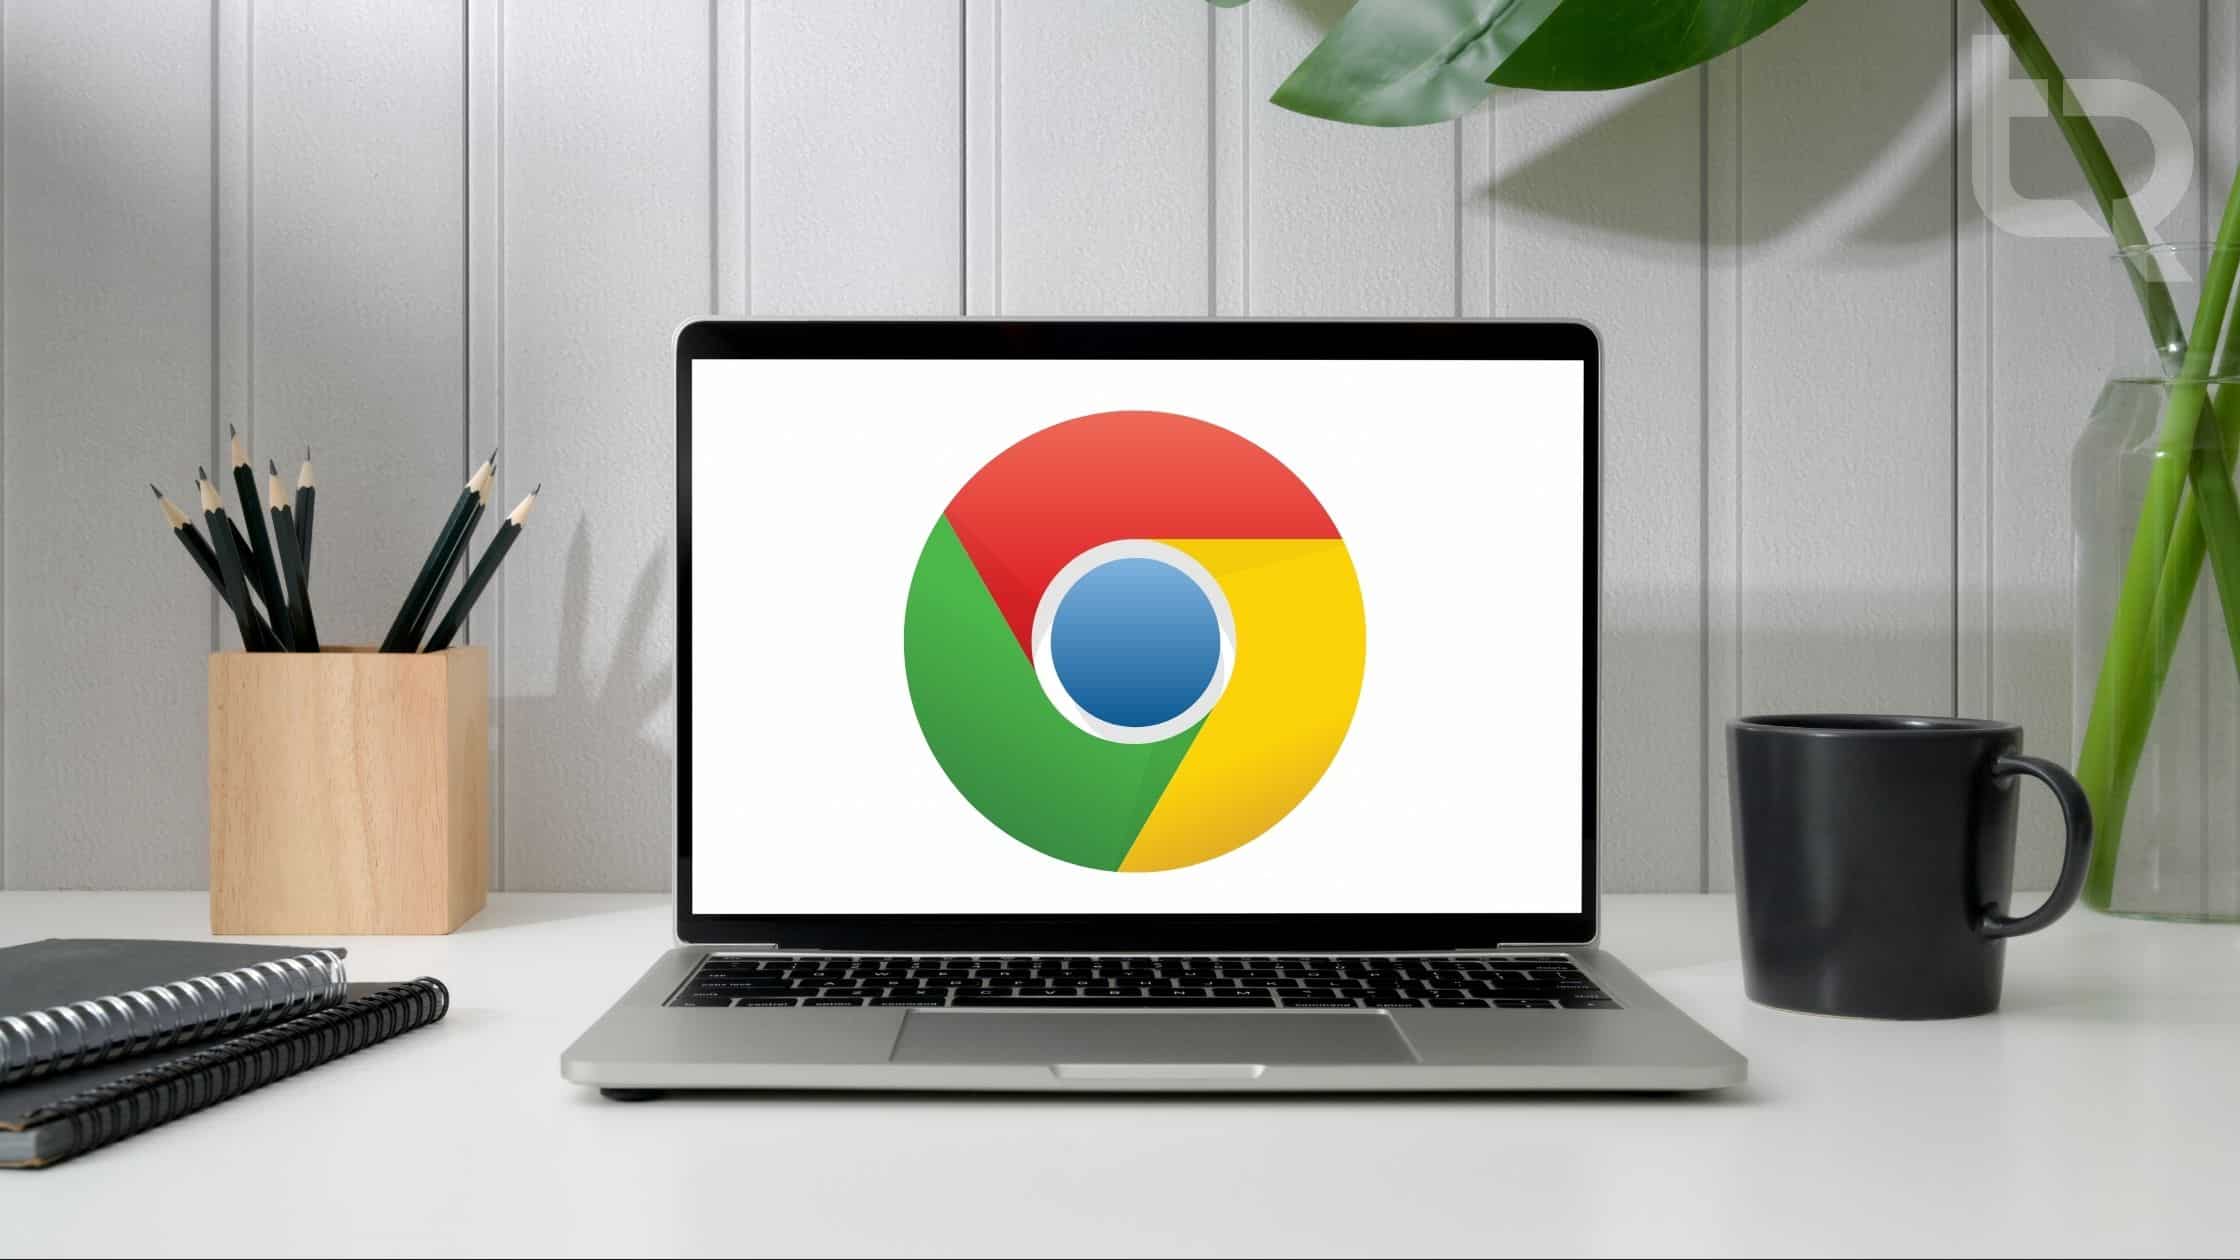 How to Install Chrome OS Flex on Old MAC: Easy Guide